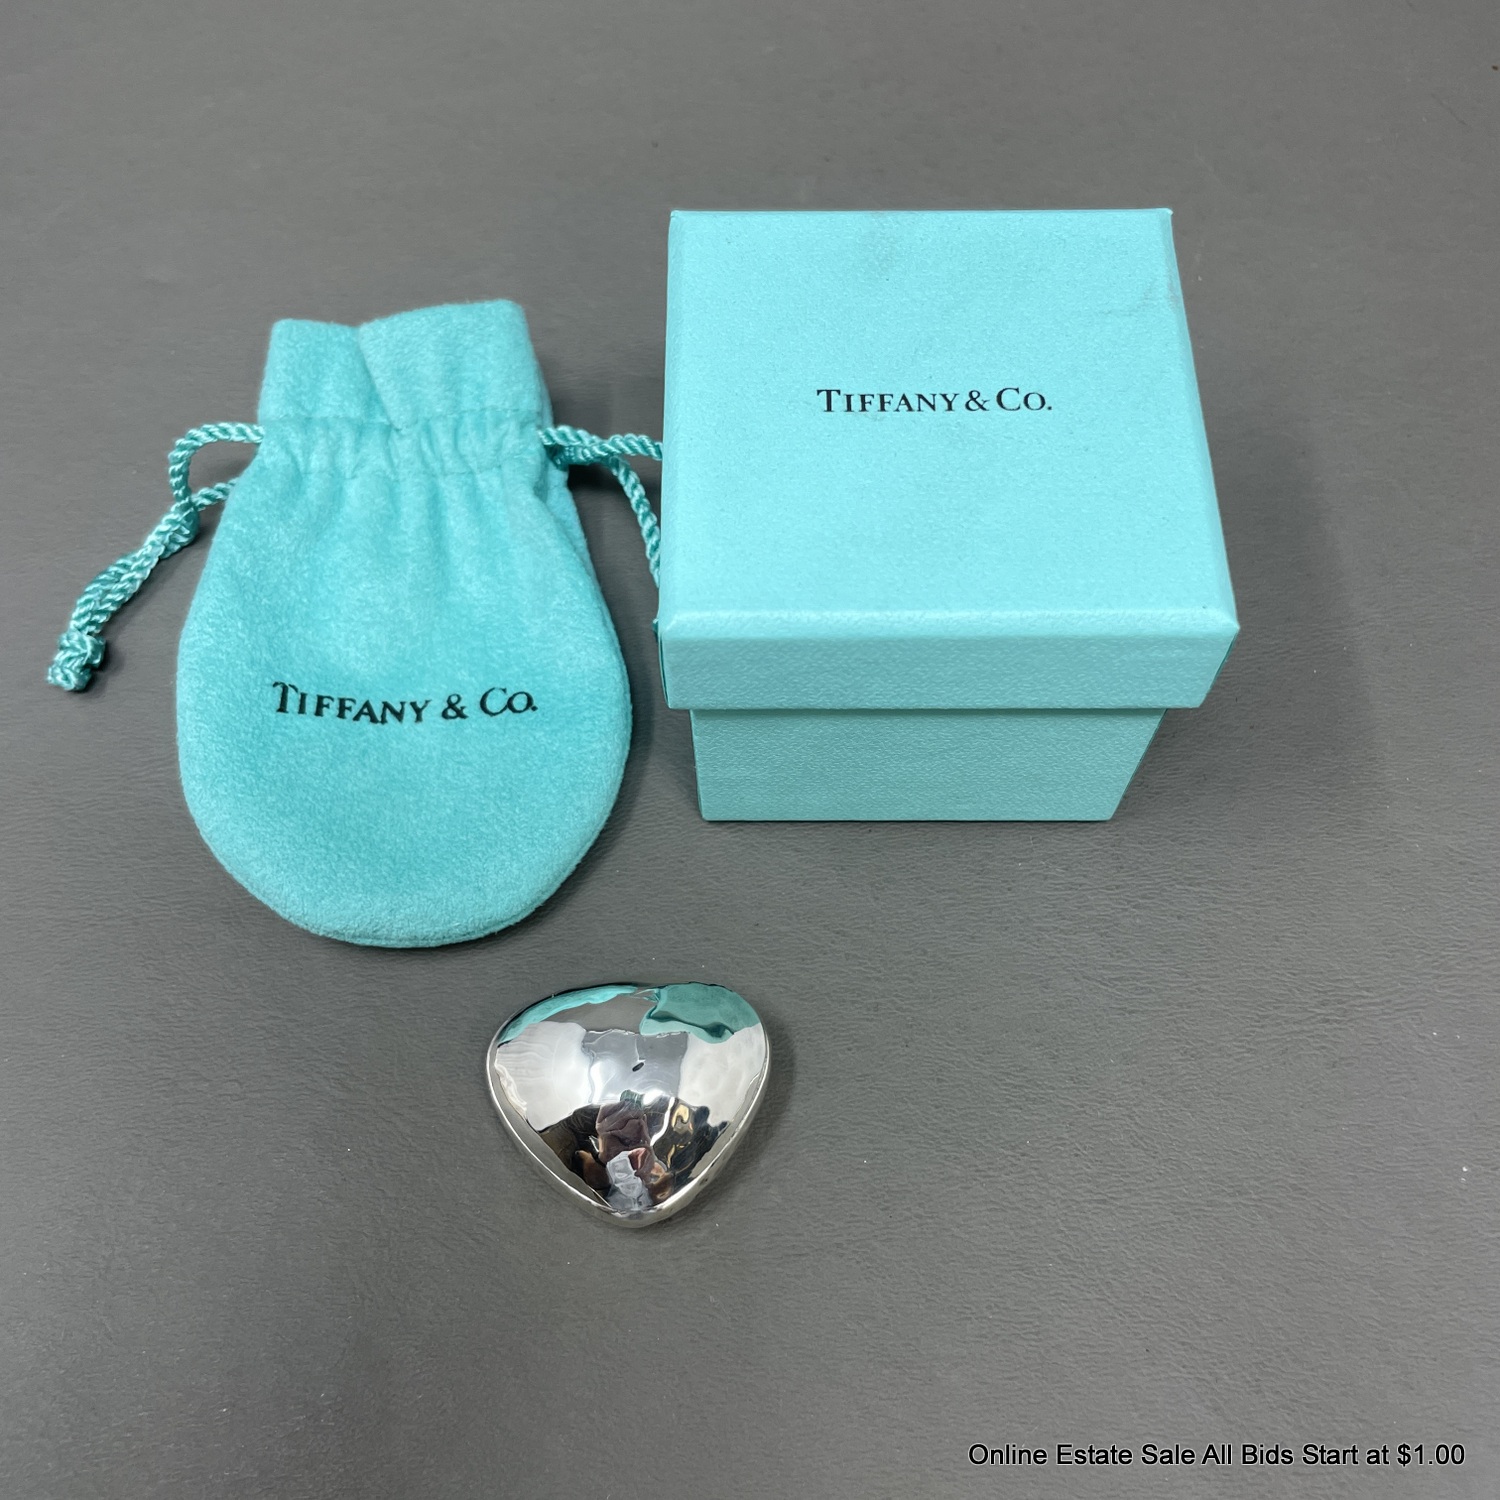 Sold at Auction: TIFFANY STERLING SILVER LUGGAGE SUITCASE PILL BOX